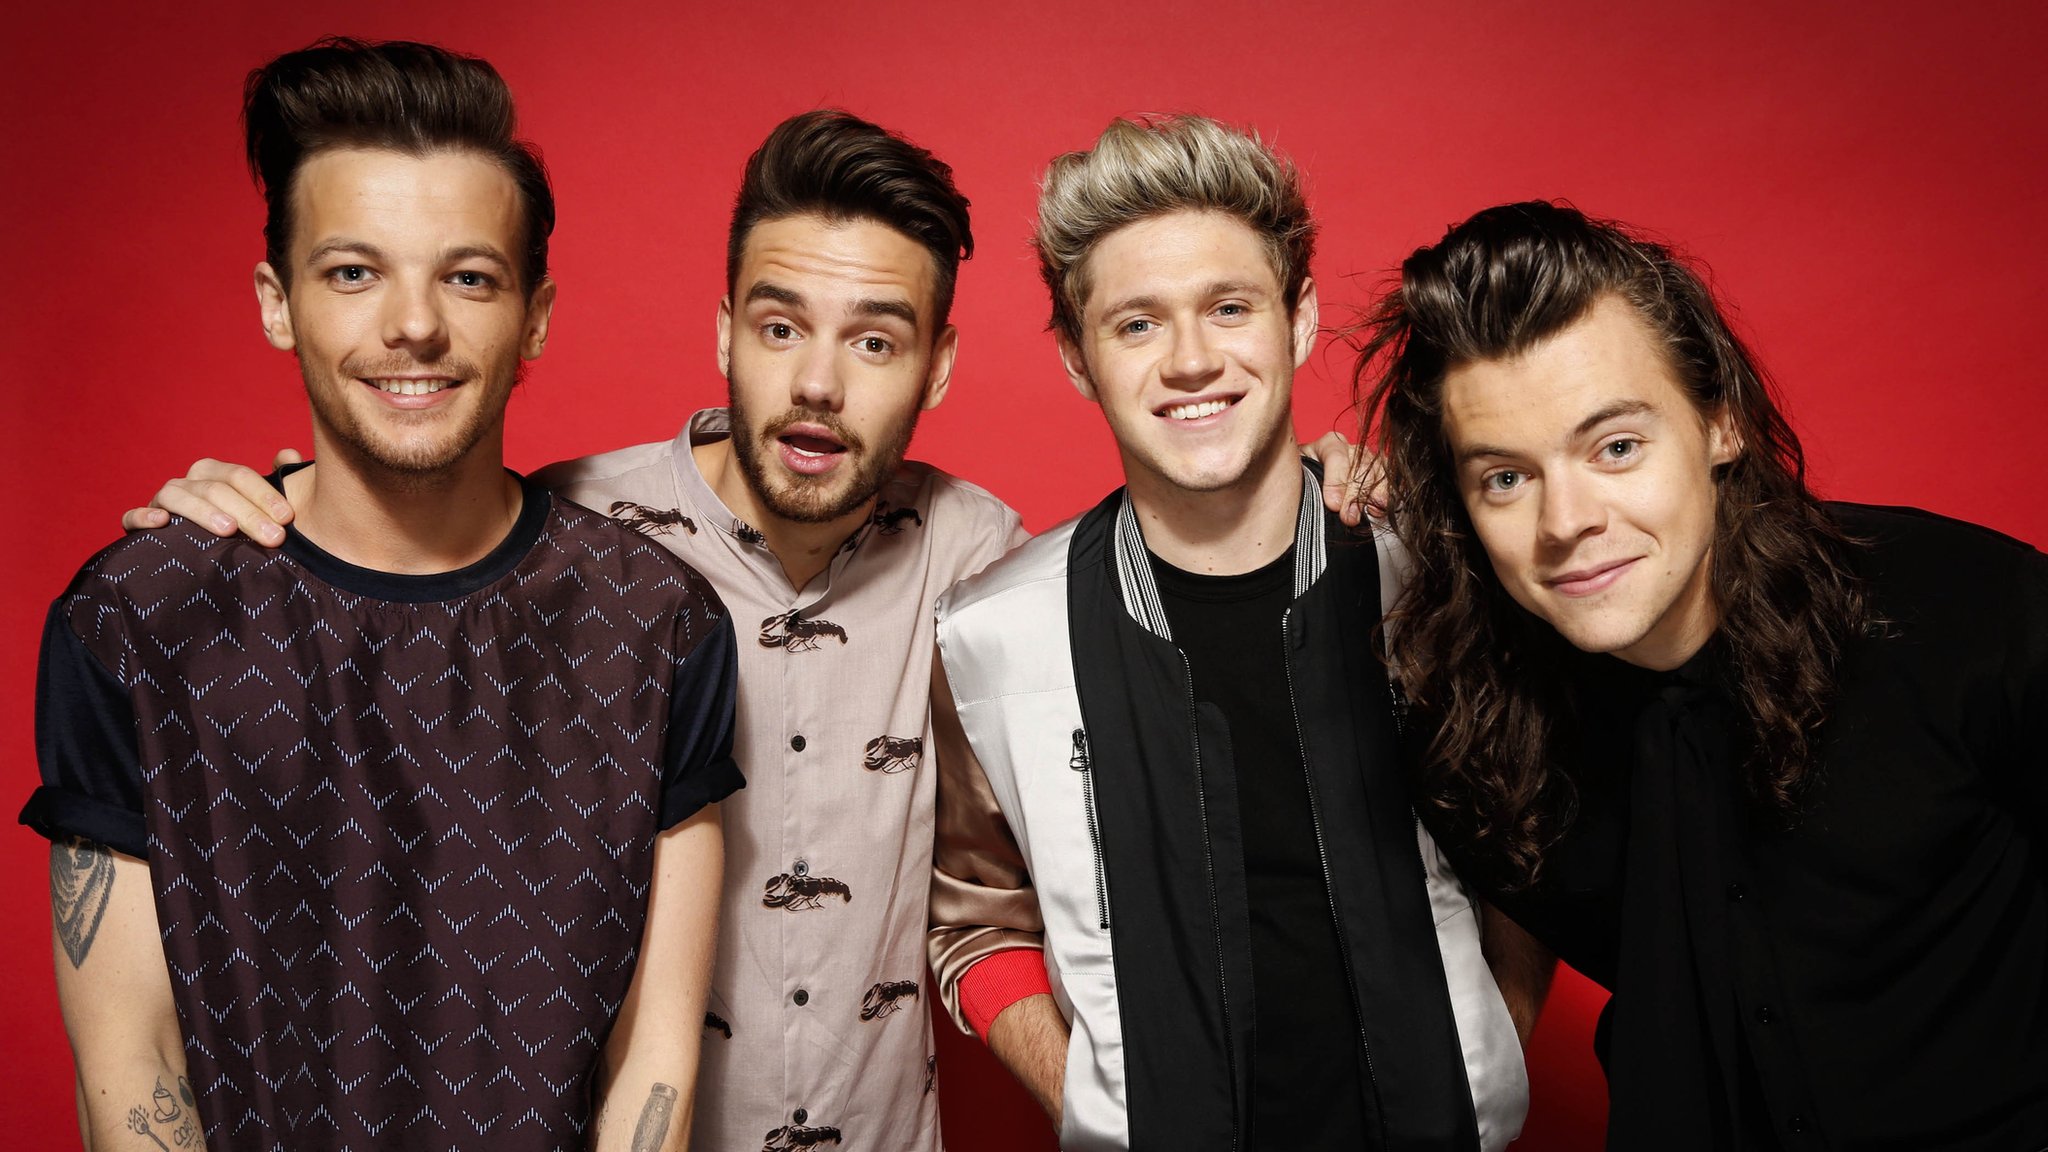 One Direction: The Incredible Journey of a Boy Band Phenomenon and their  Unforgettable Music Legacy, by Jhalakchhapola